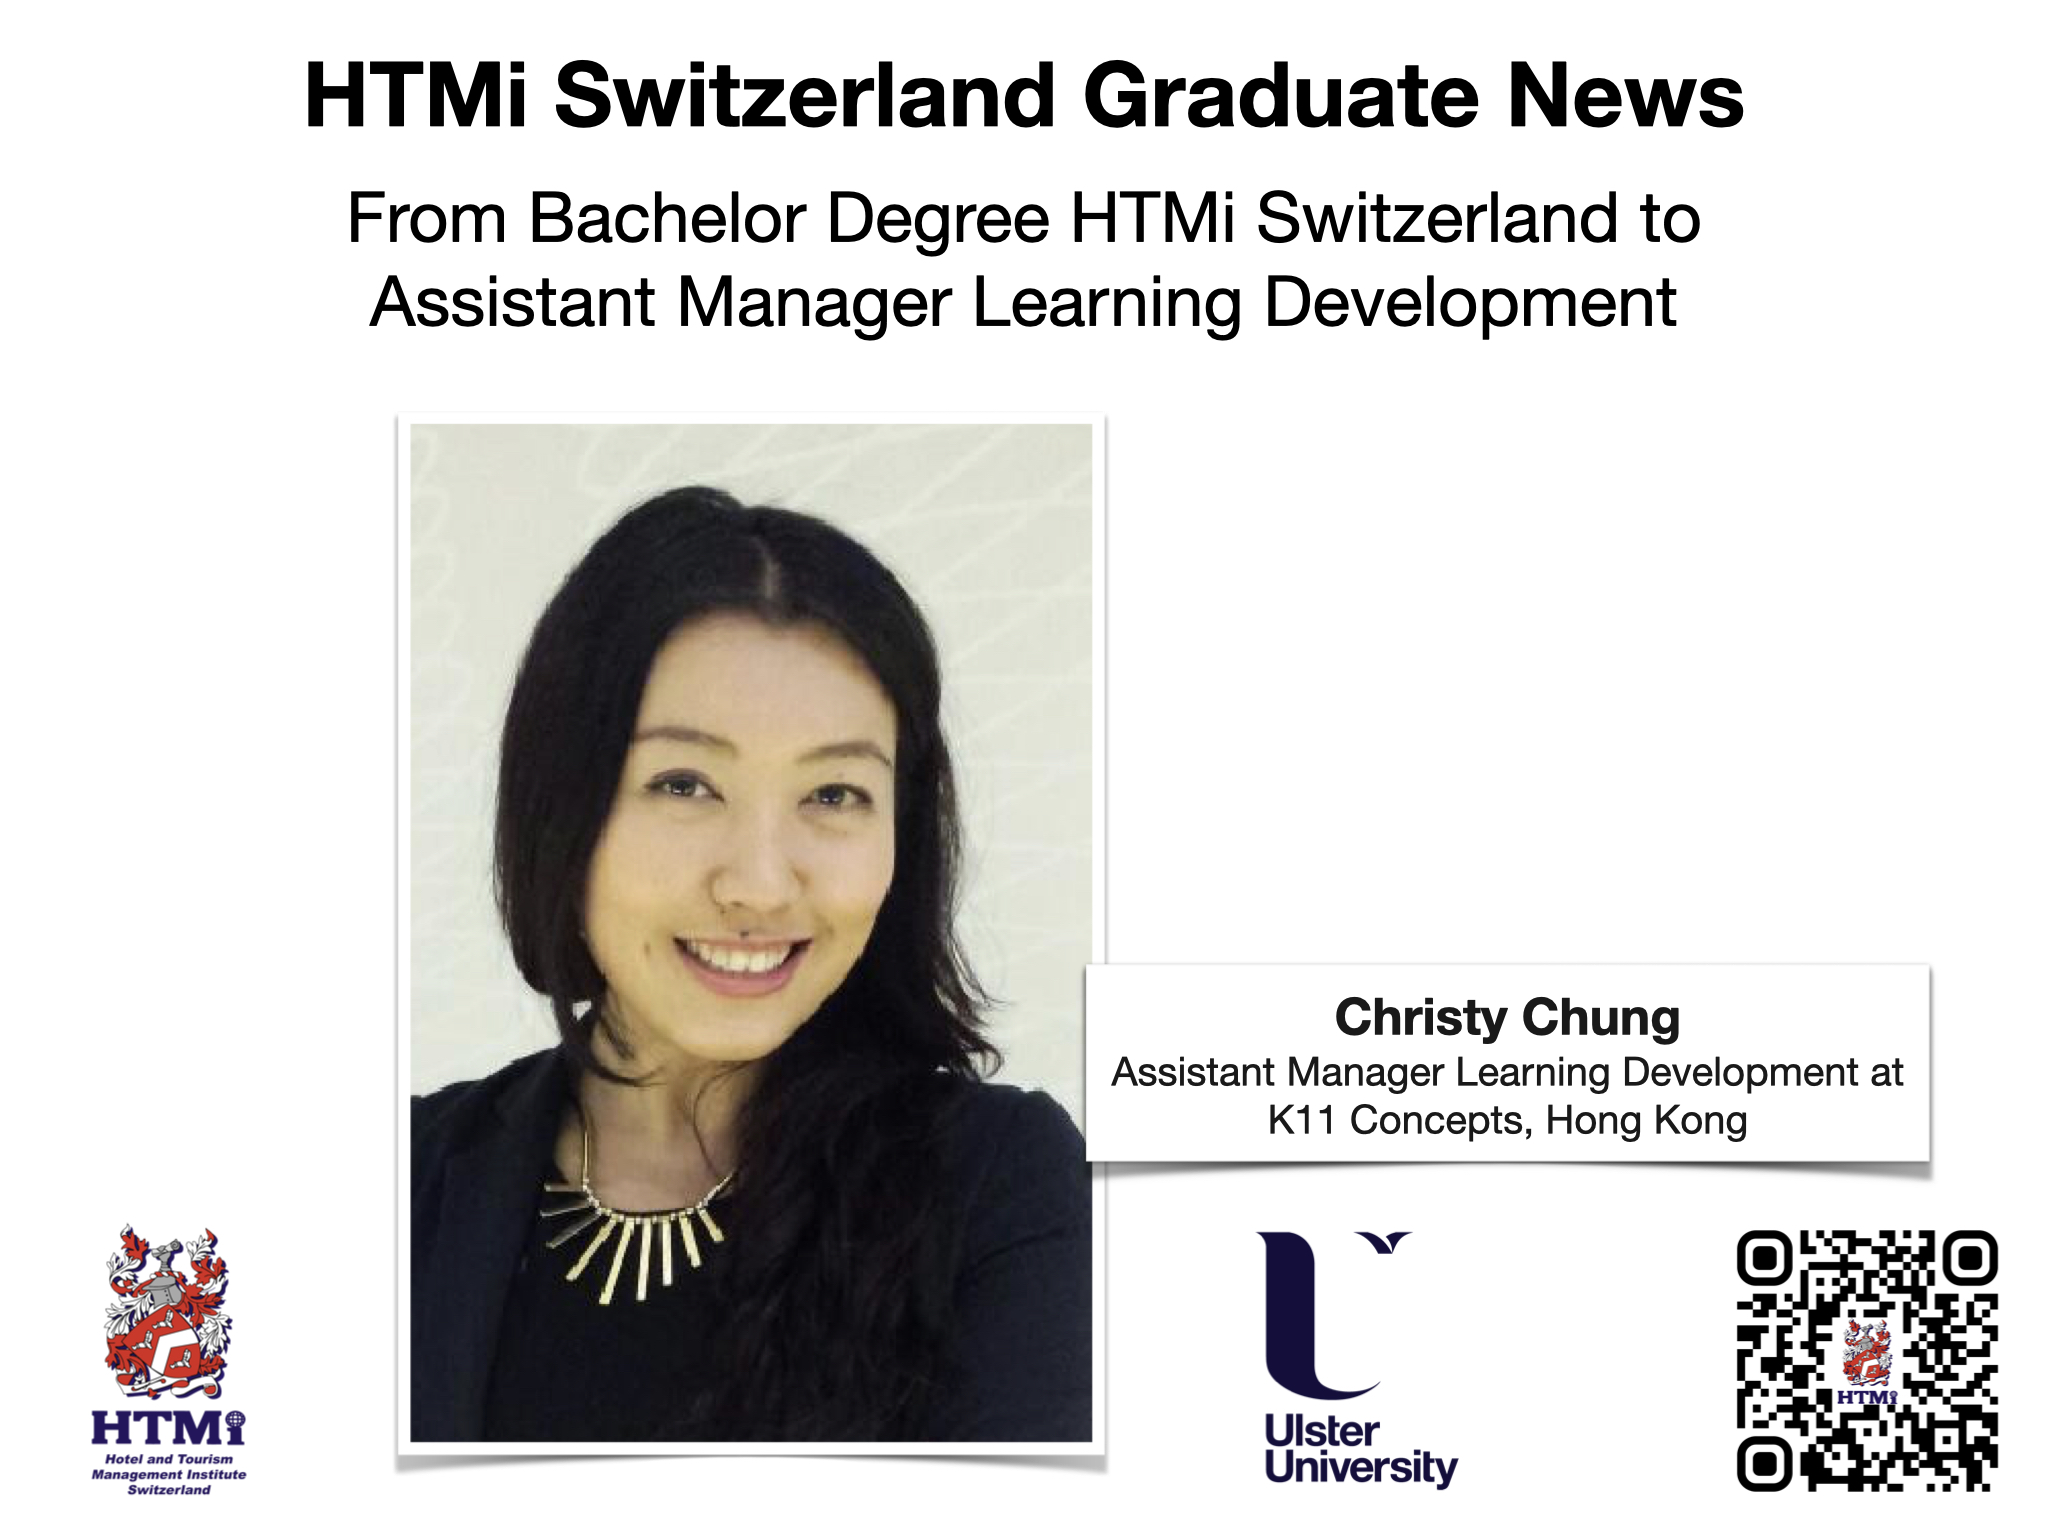 Christy Chung - From Bachelor Degree HTMi Switzerland to Assistant Manager Learning Development - HTMi Switzerland Graduate News